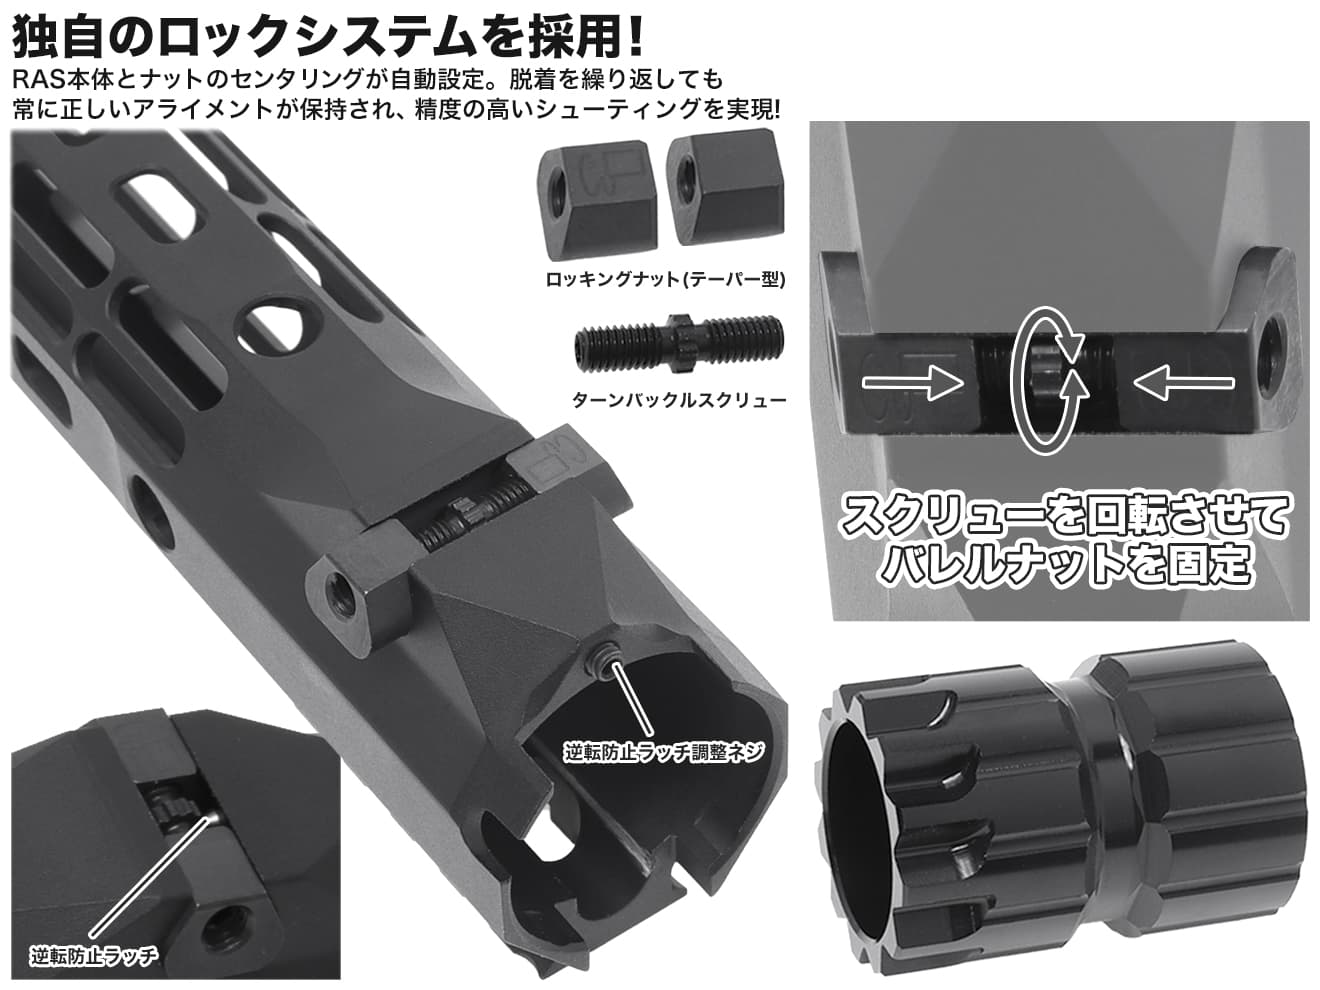 IRON AIRSOFT APタイル S-ONE M-LOK レールハンドガード 7.3インチ for PTW/WE GBB M4